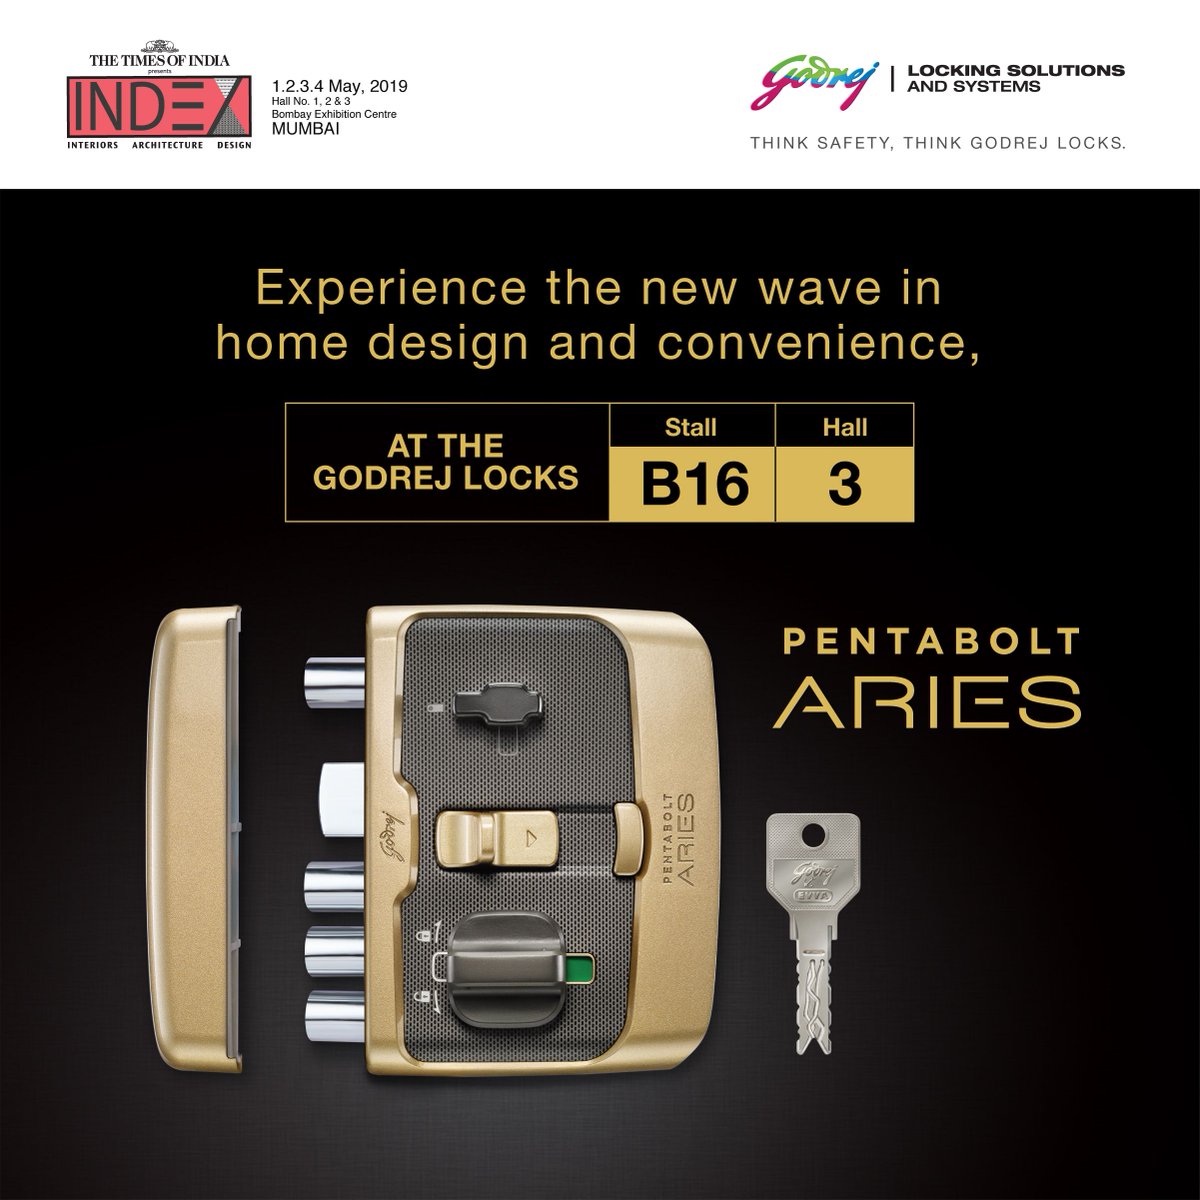 Visit Godrej's exclusive product collection at #IndexTradefairs.
Stall No. B16 in Hall No.3
#tradeshow #exhibitions #locks #LockingSolutions #interiorstyling #interiordesign #interior #interiordesigner #interiordecor #architecture #architect #interior_design #events #Index2019